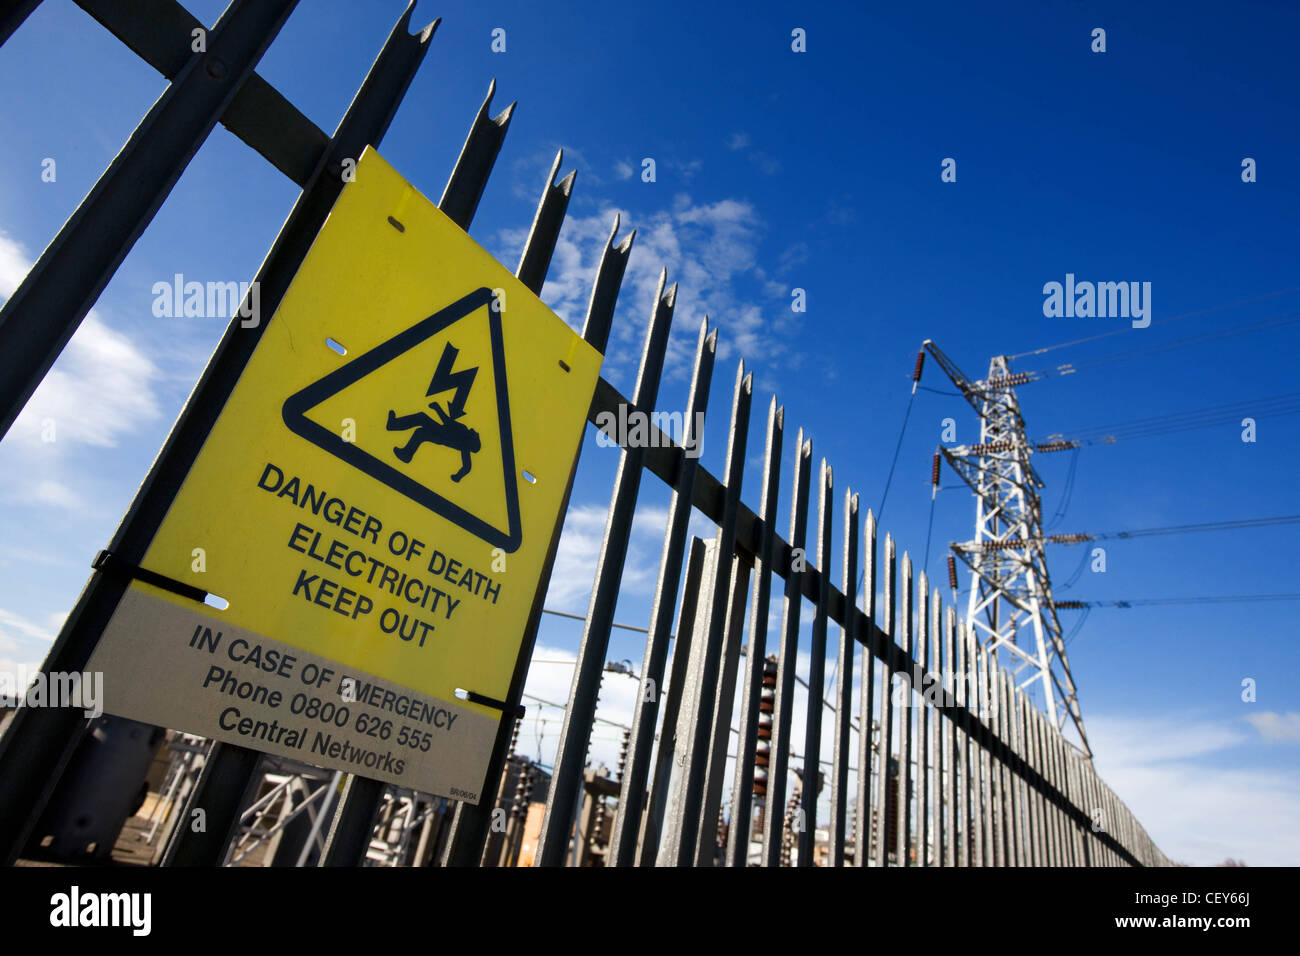 Security fencing on a electricity sub station with Danger of Death Sign Stock Photo